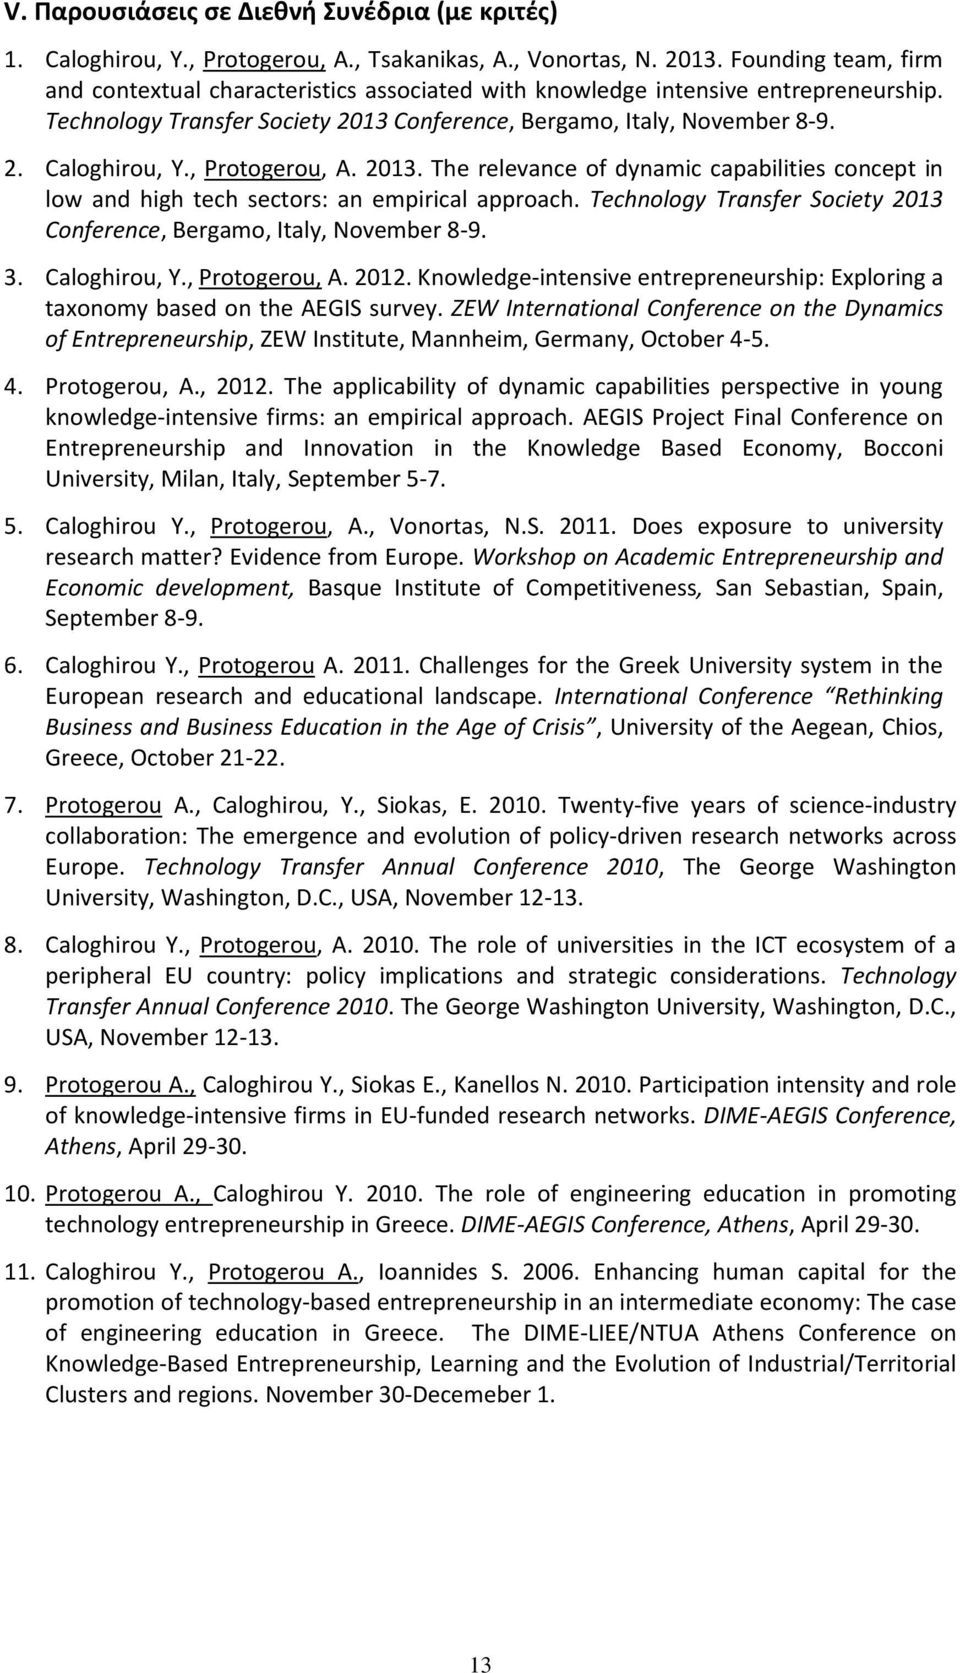 , Protogerou, A. 2013. The relevance of dynamic capabilities concept in low and high tech sectors: an empirical approach. Technology Transfer Society 2013 Conference, Bergamo, Italy, November 8-9. 3.